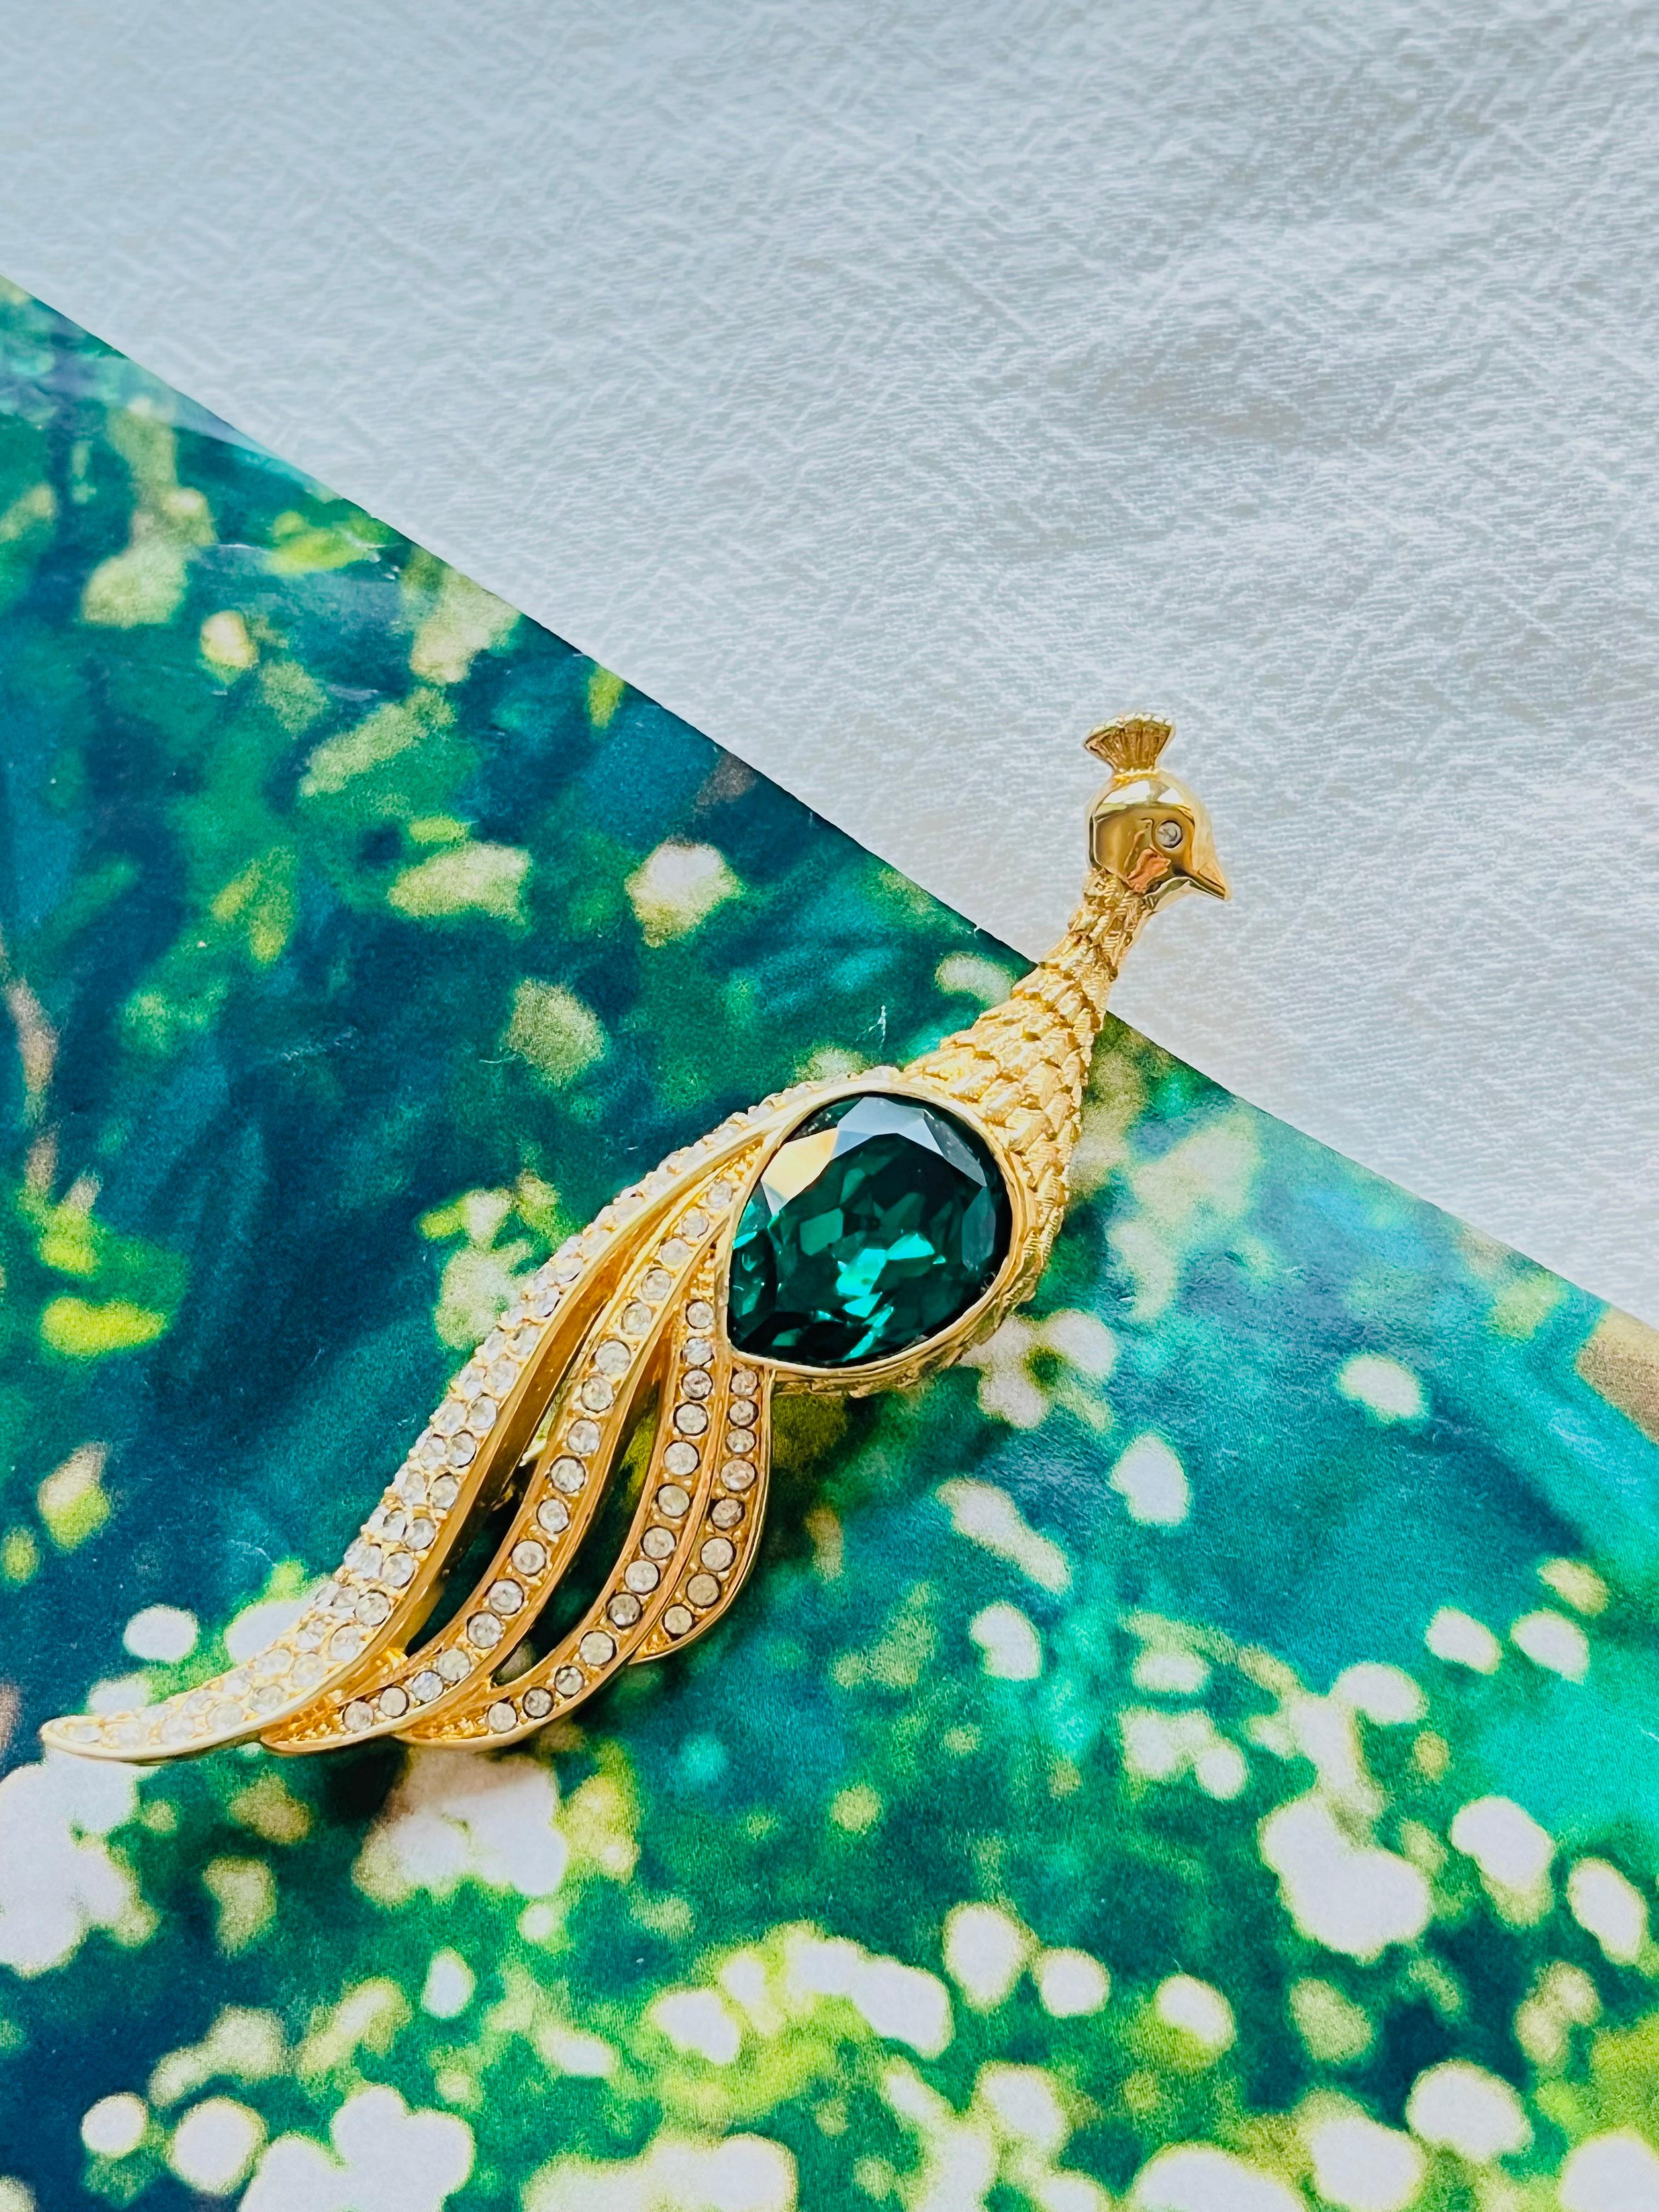 Christian Dior Vintage 1980s Large Long Vivid Peacock Emerald Water Drop Shining Crystals Openwork Brooch, Gold Plated

100% Genuine. Very excellent condition. Very new. Rare to find.

A unique piece. This is gold plated stylised brooch, dating to